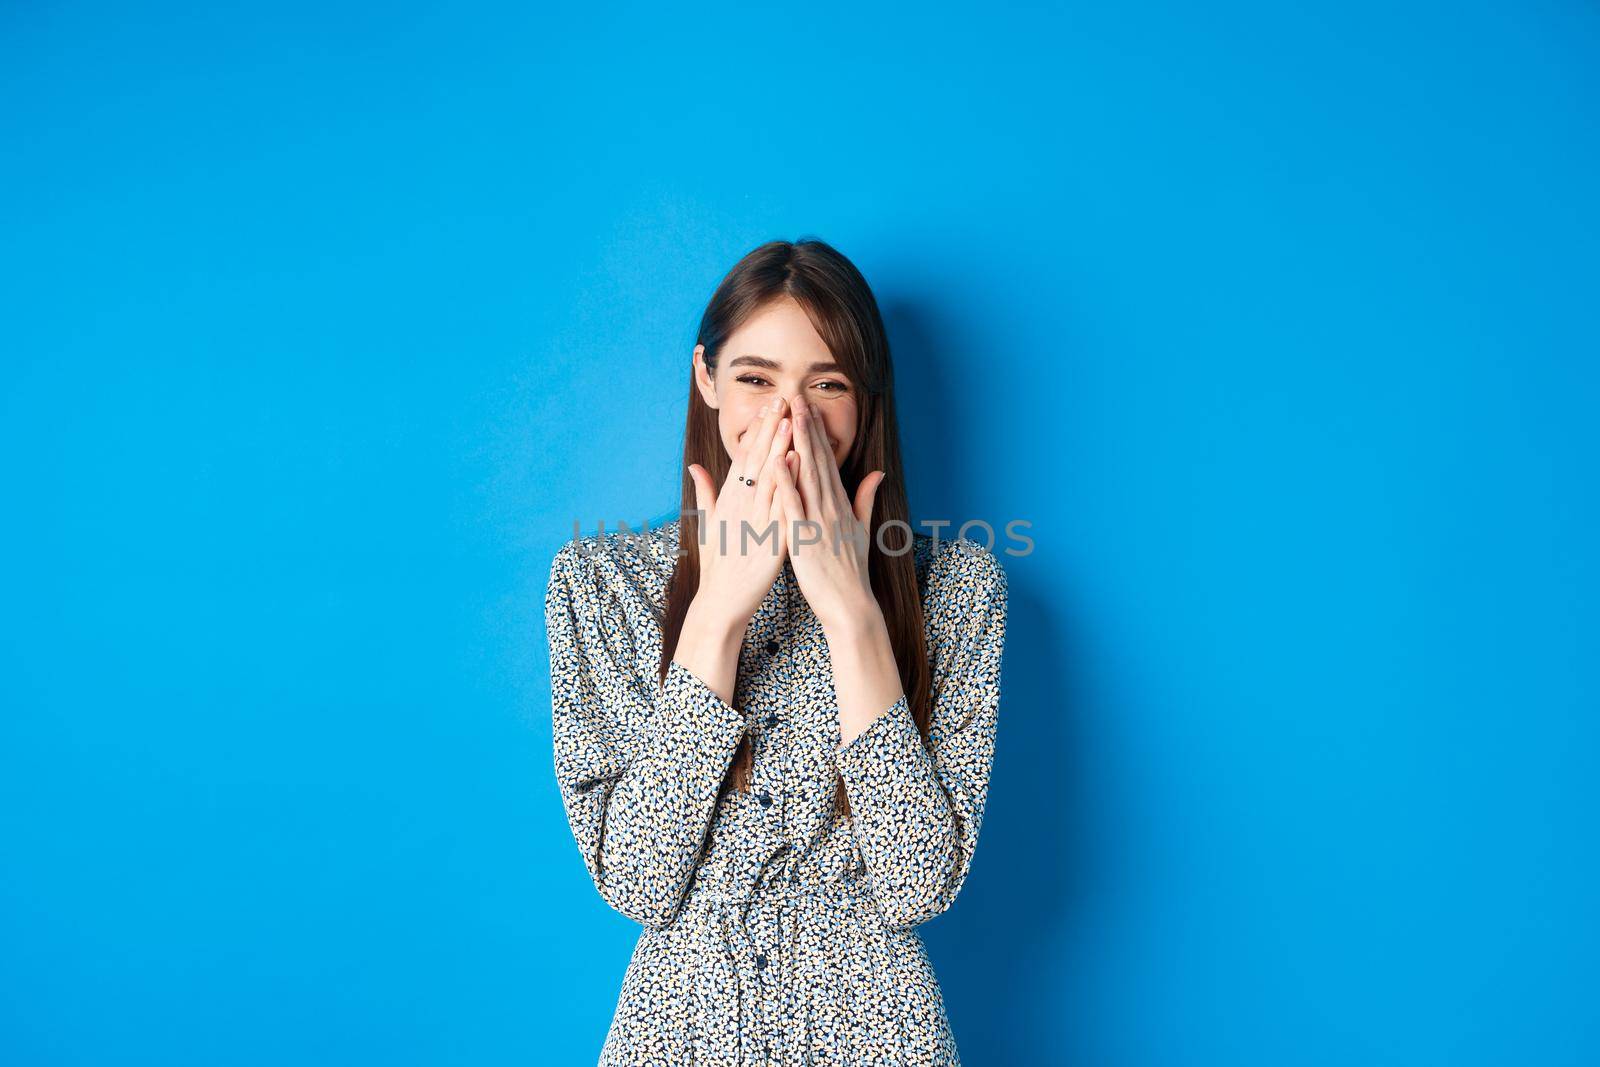 Cheerful caucasina girl in dress laughing and having fun, covering mouth with hands and chuckle over something funny, standing on blue background.